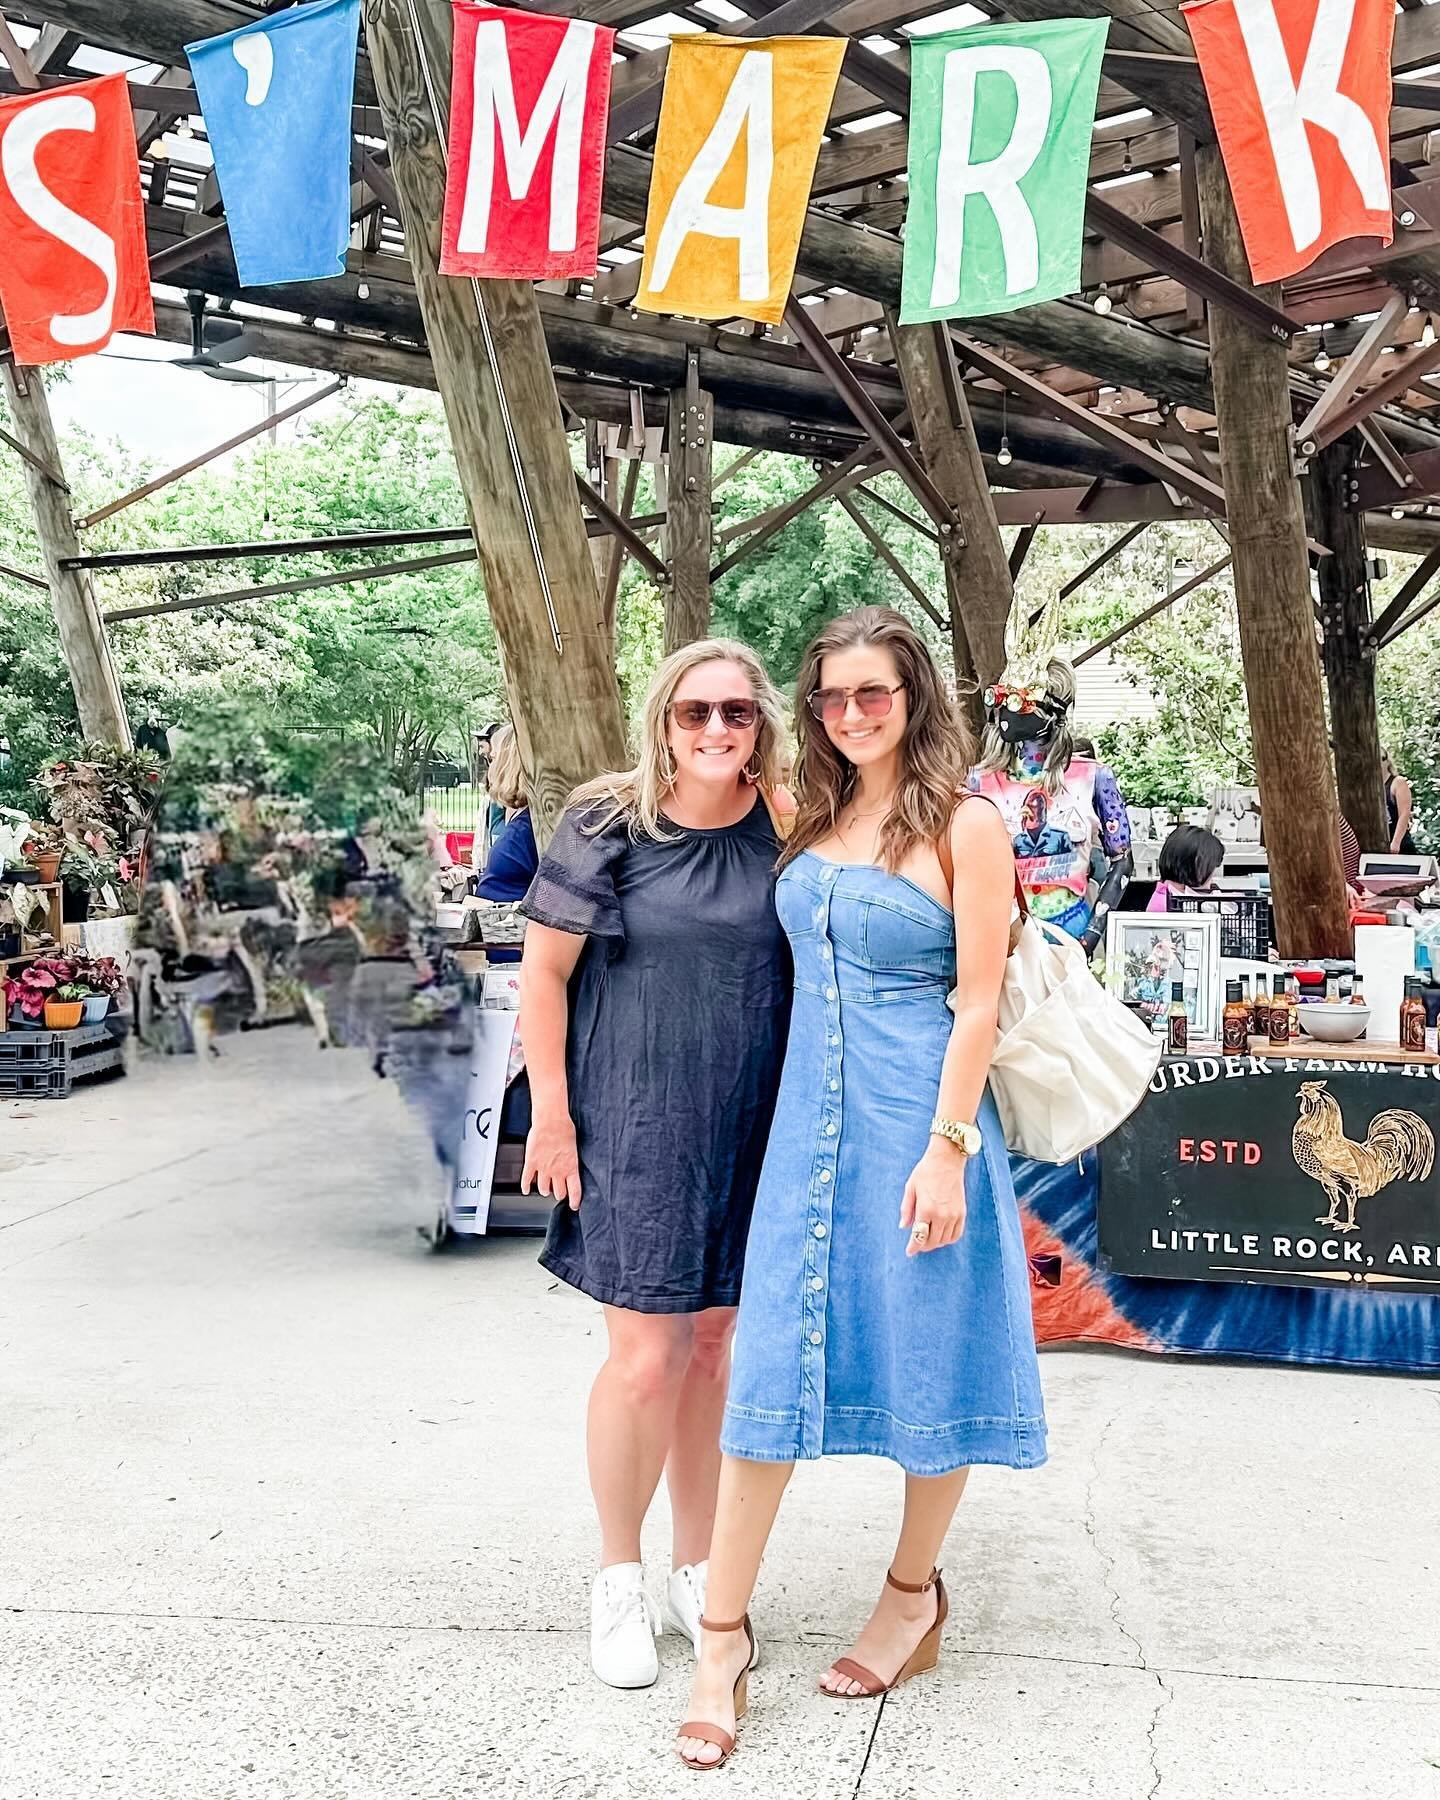 Farmers market + brunch + childhood friend = THE BEST WAY TO SPEND A SUNDAY!